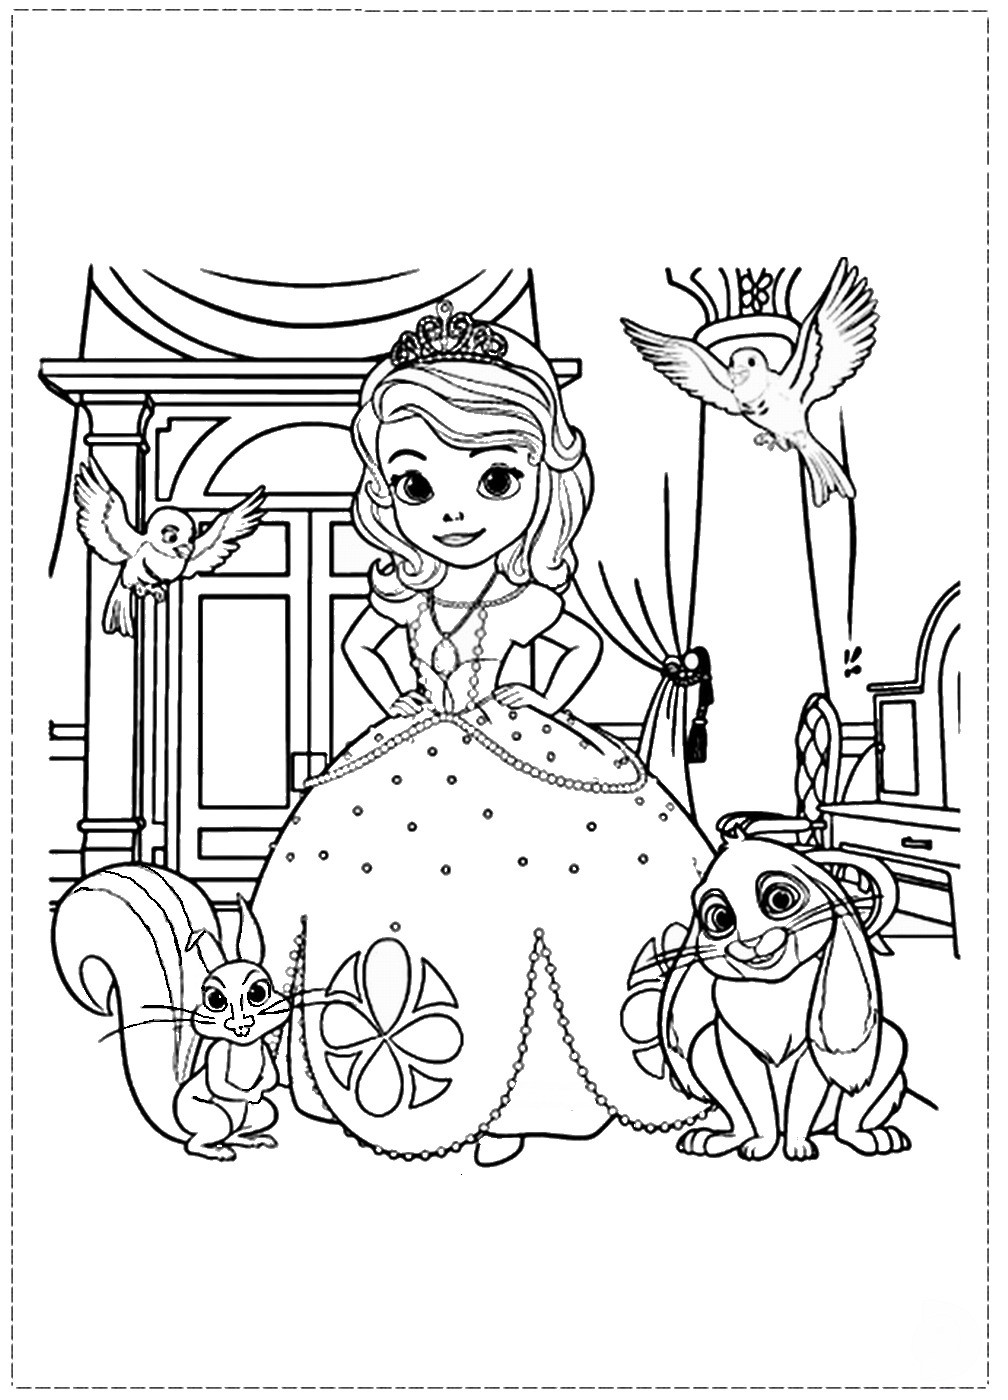 Sofia The First Printable Coloring Pages
 Sofia the First Coloring Pages